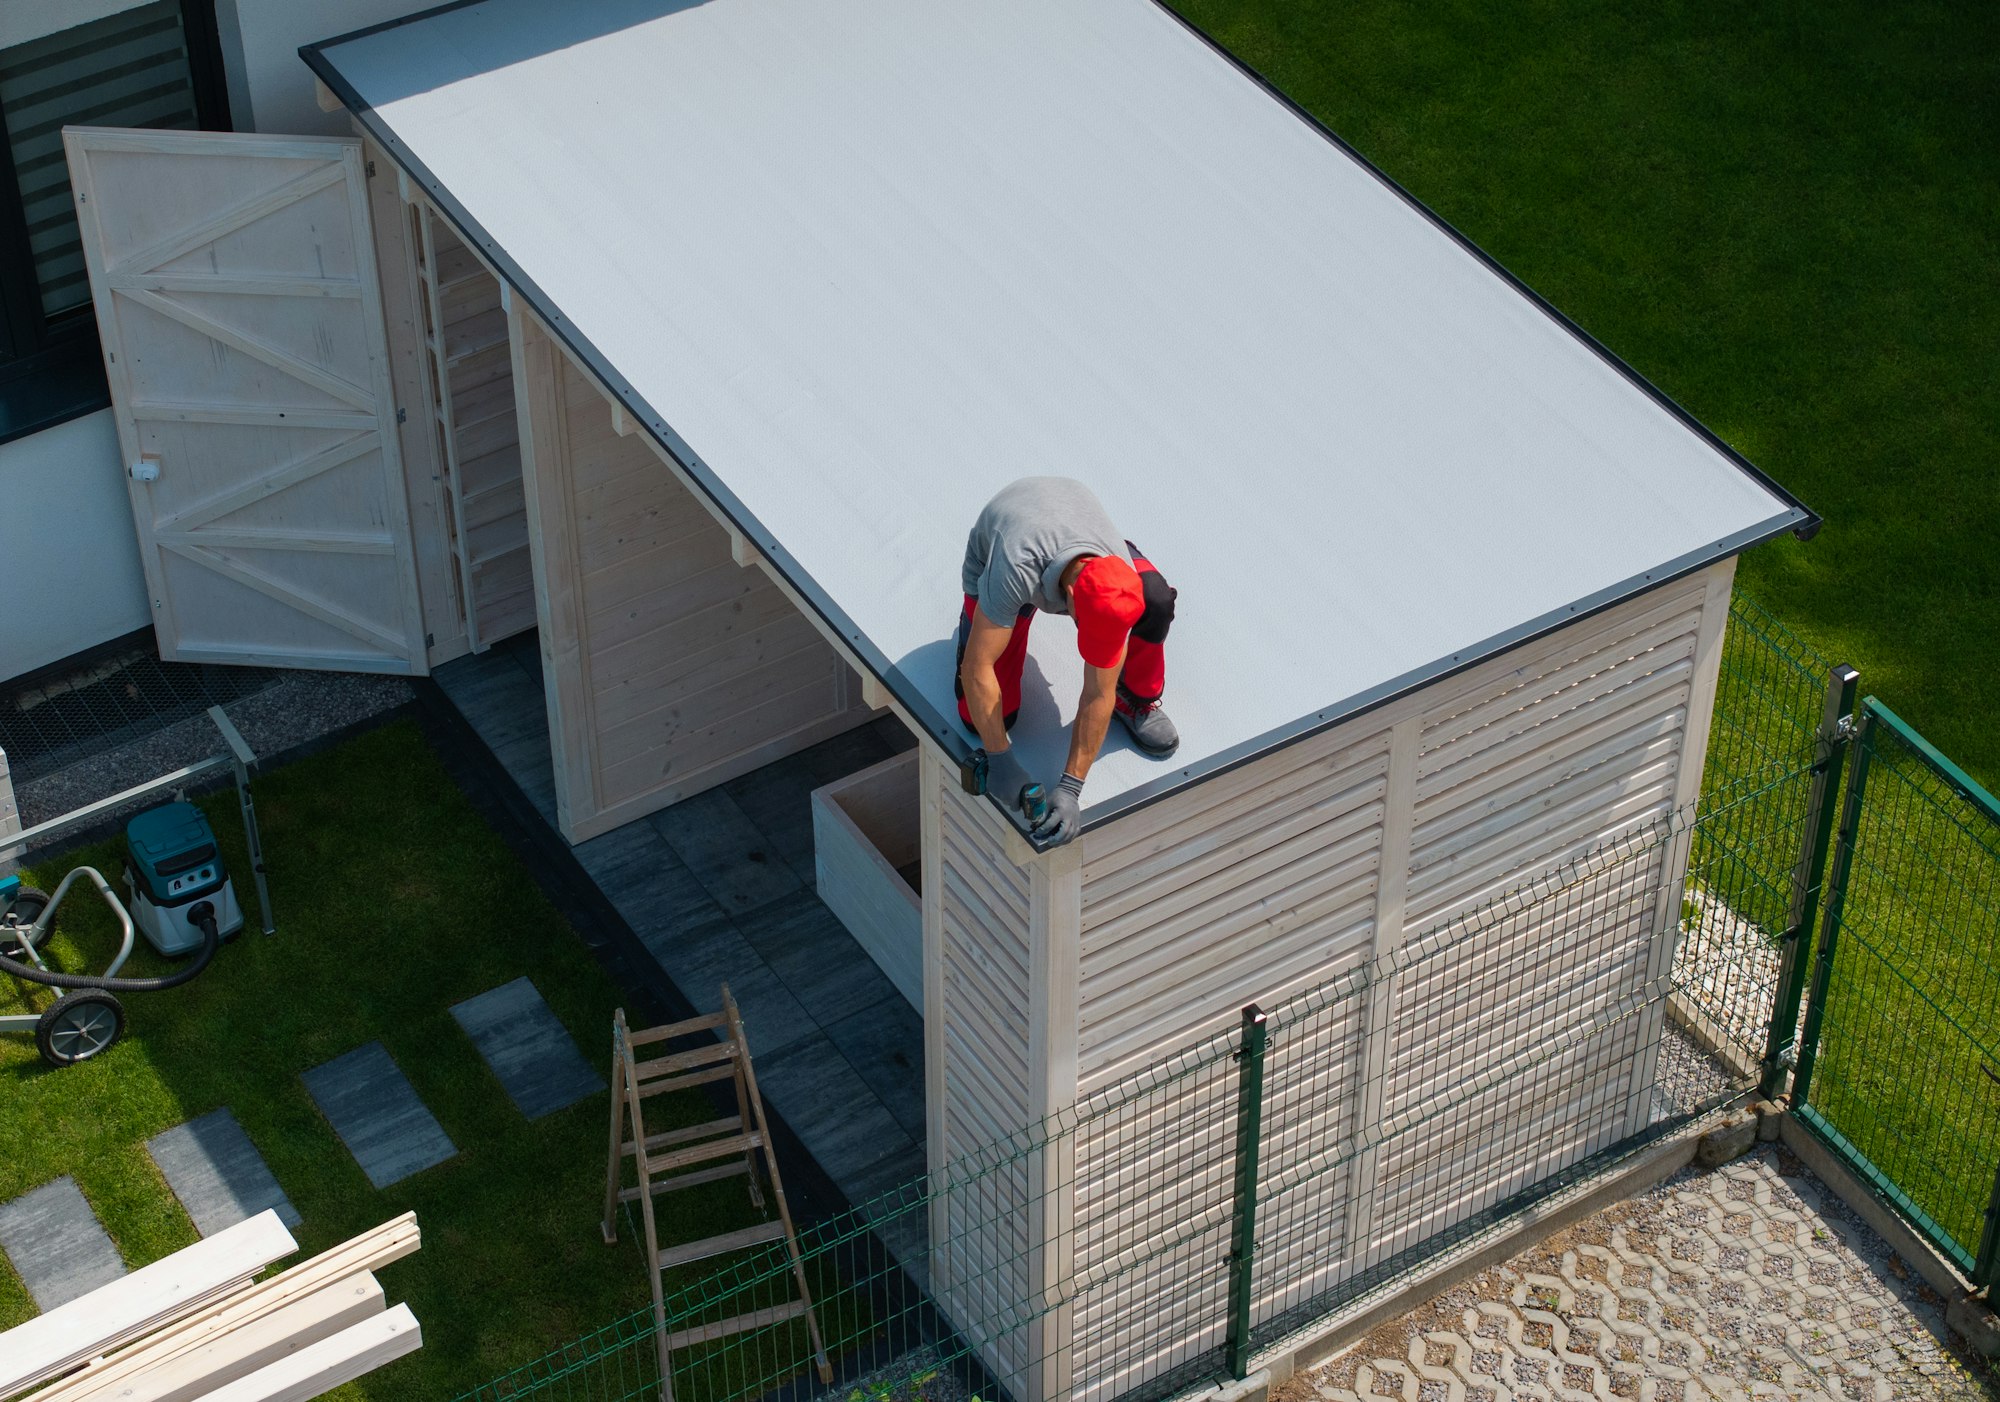 Worker Installing Roof on Wooden Shed